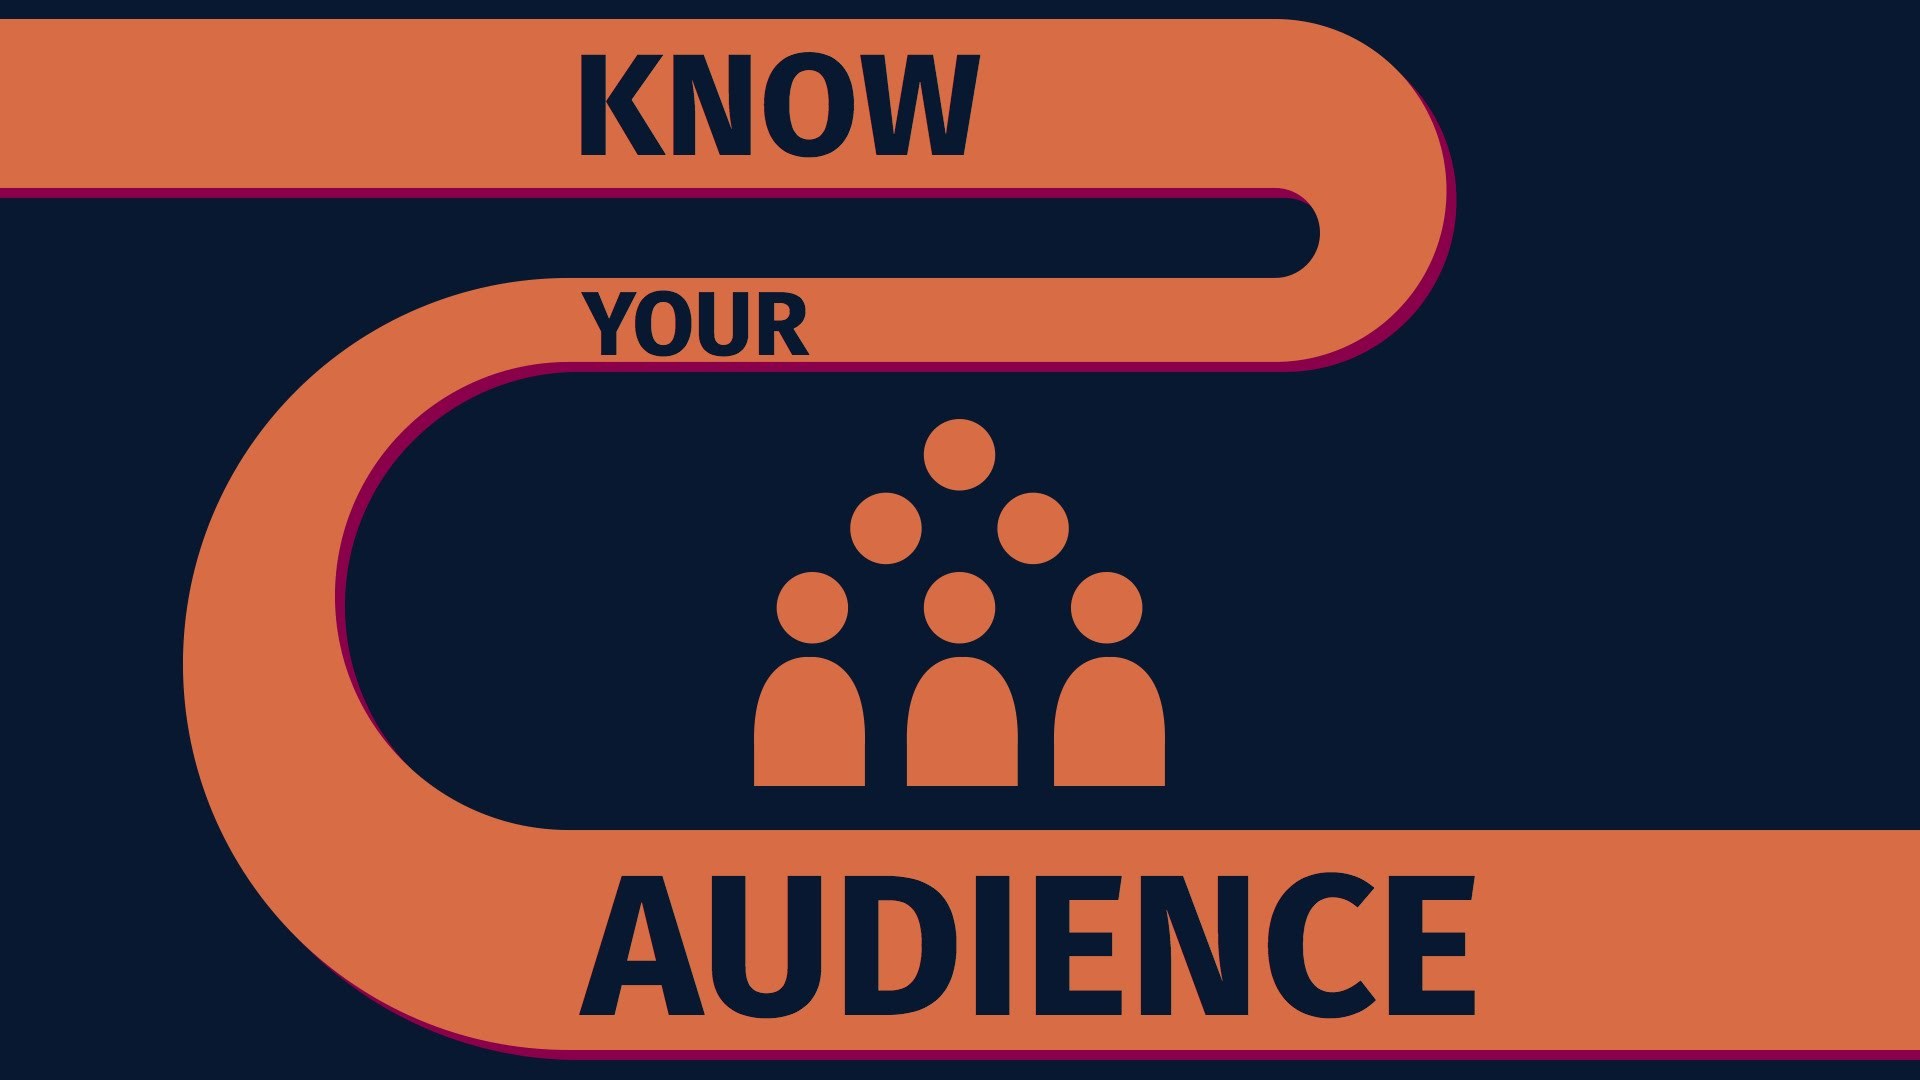 Knowing your audience